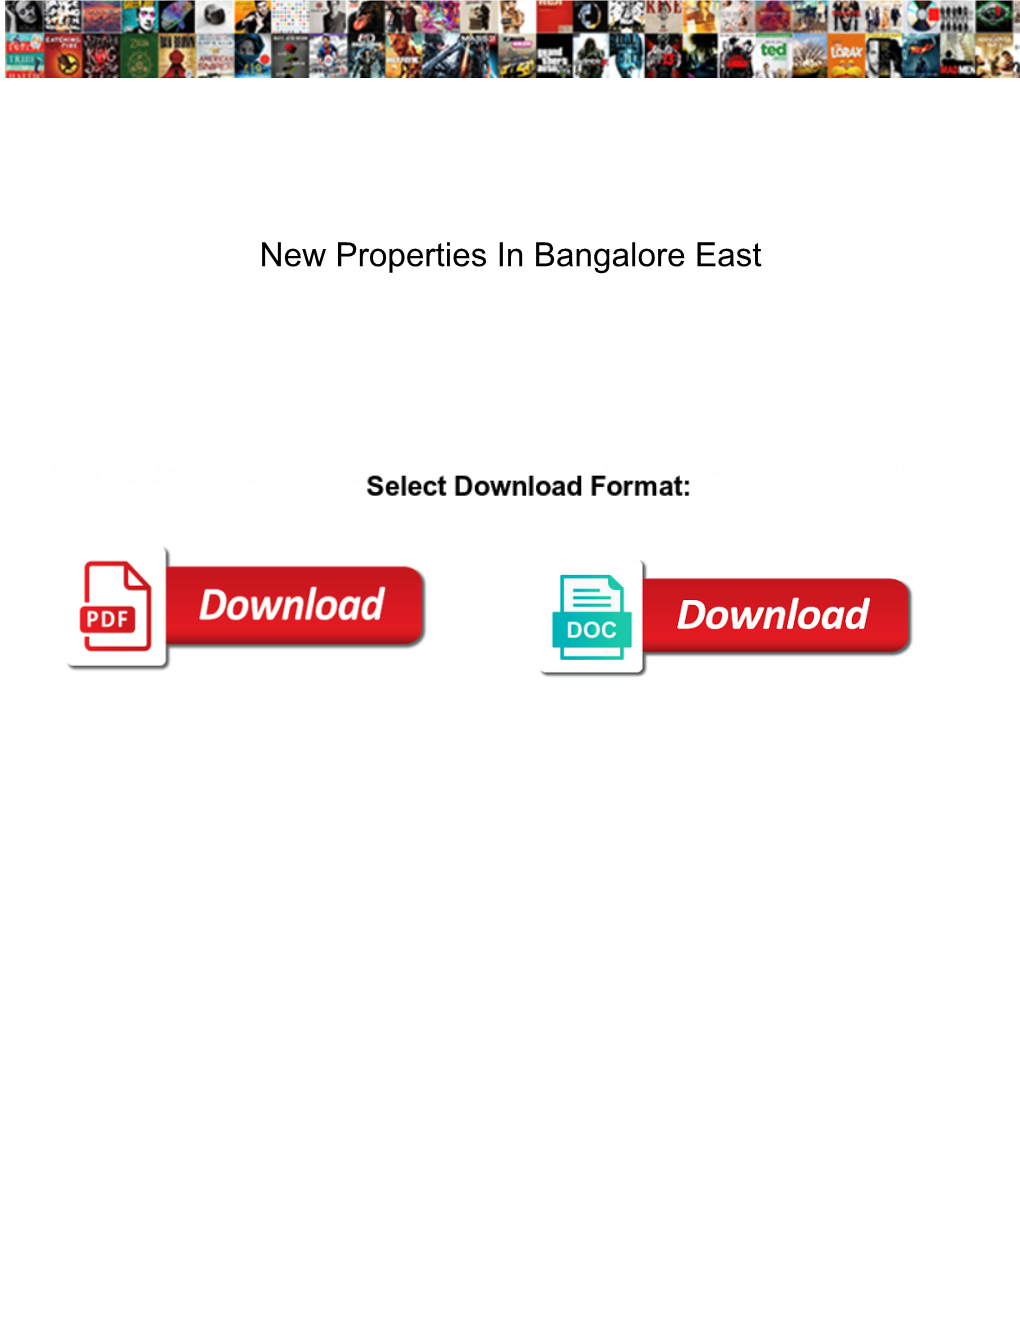 New Properties in Bangalore East